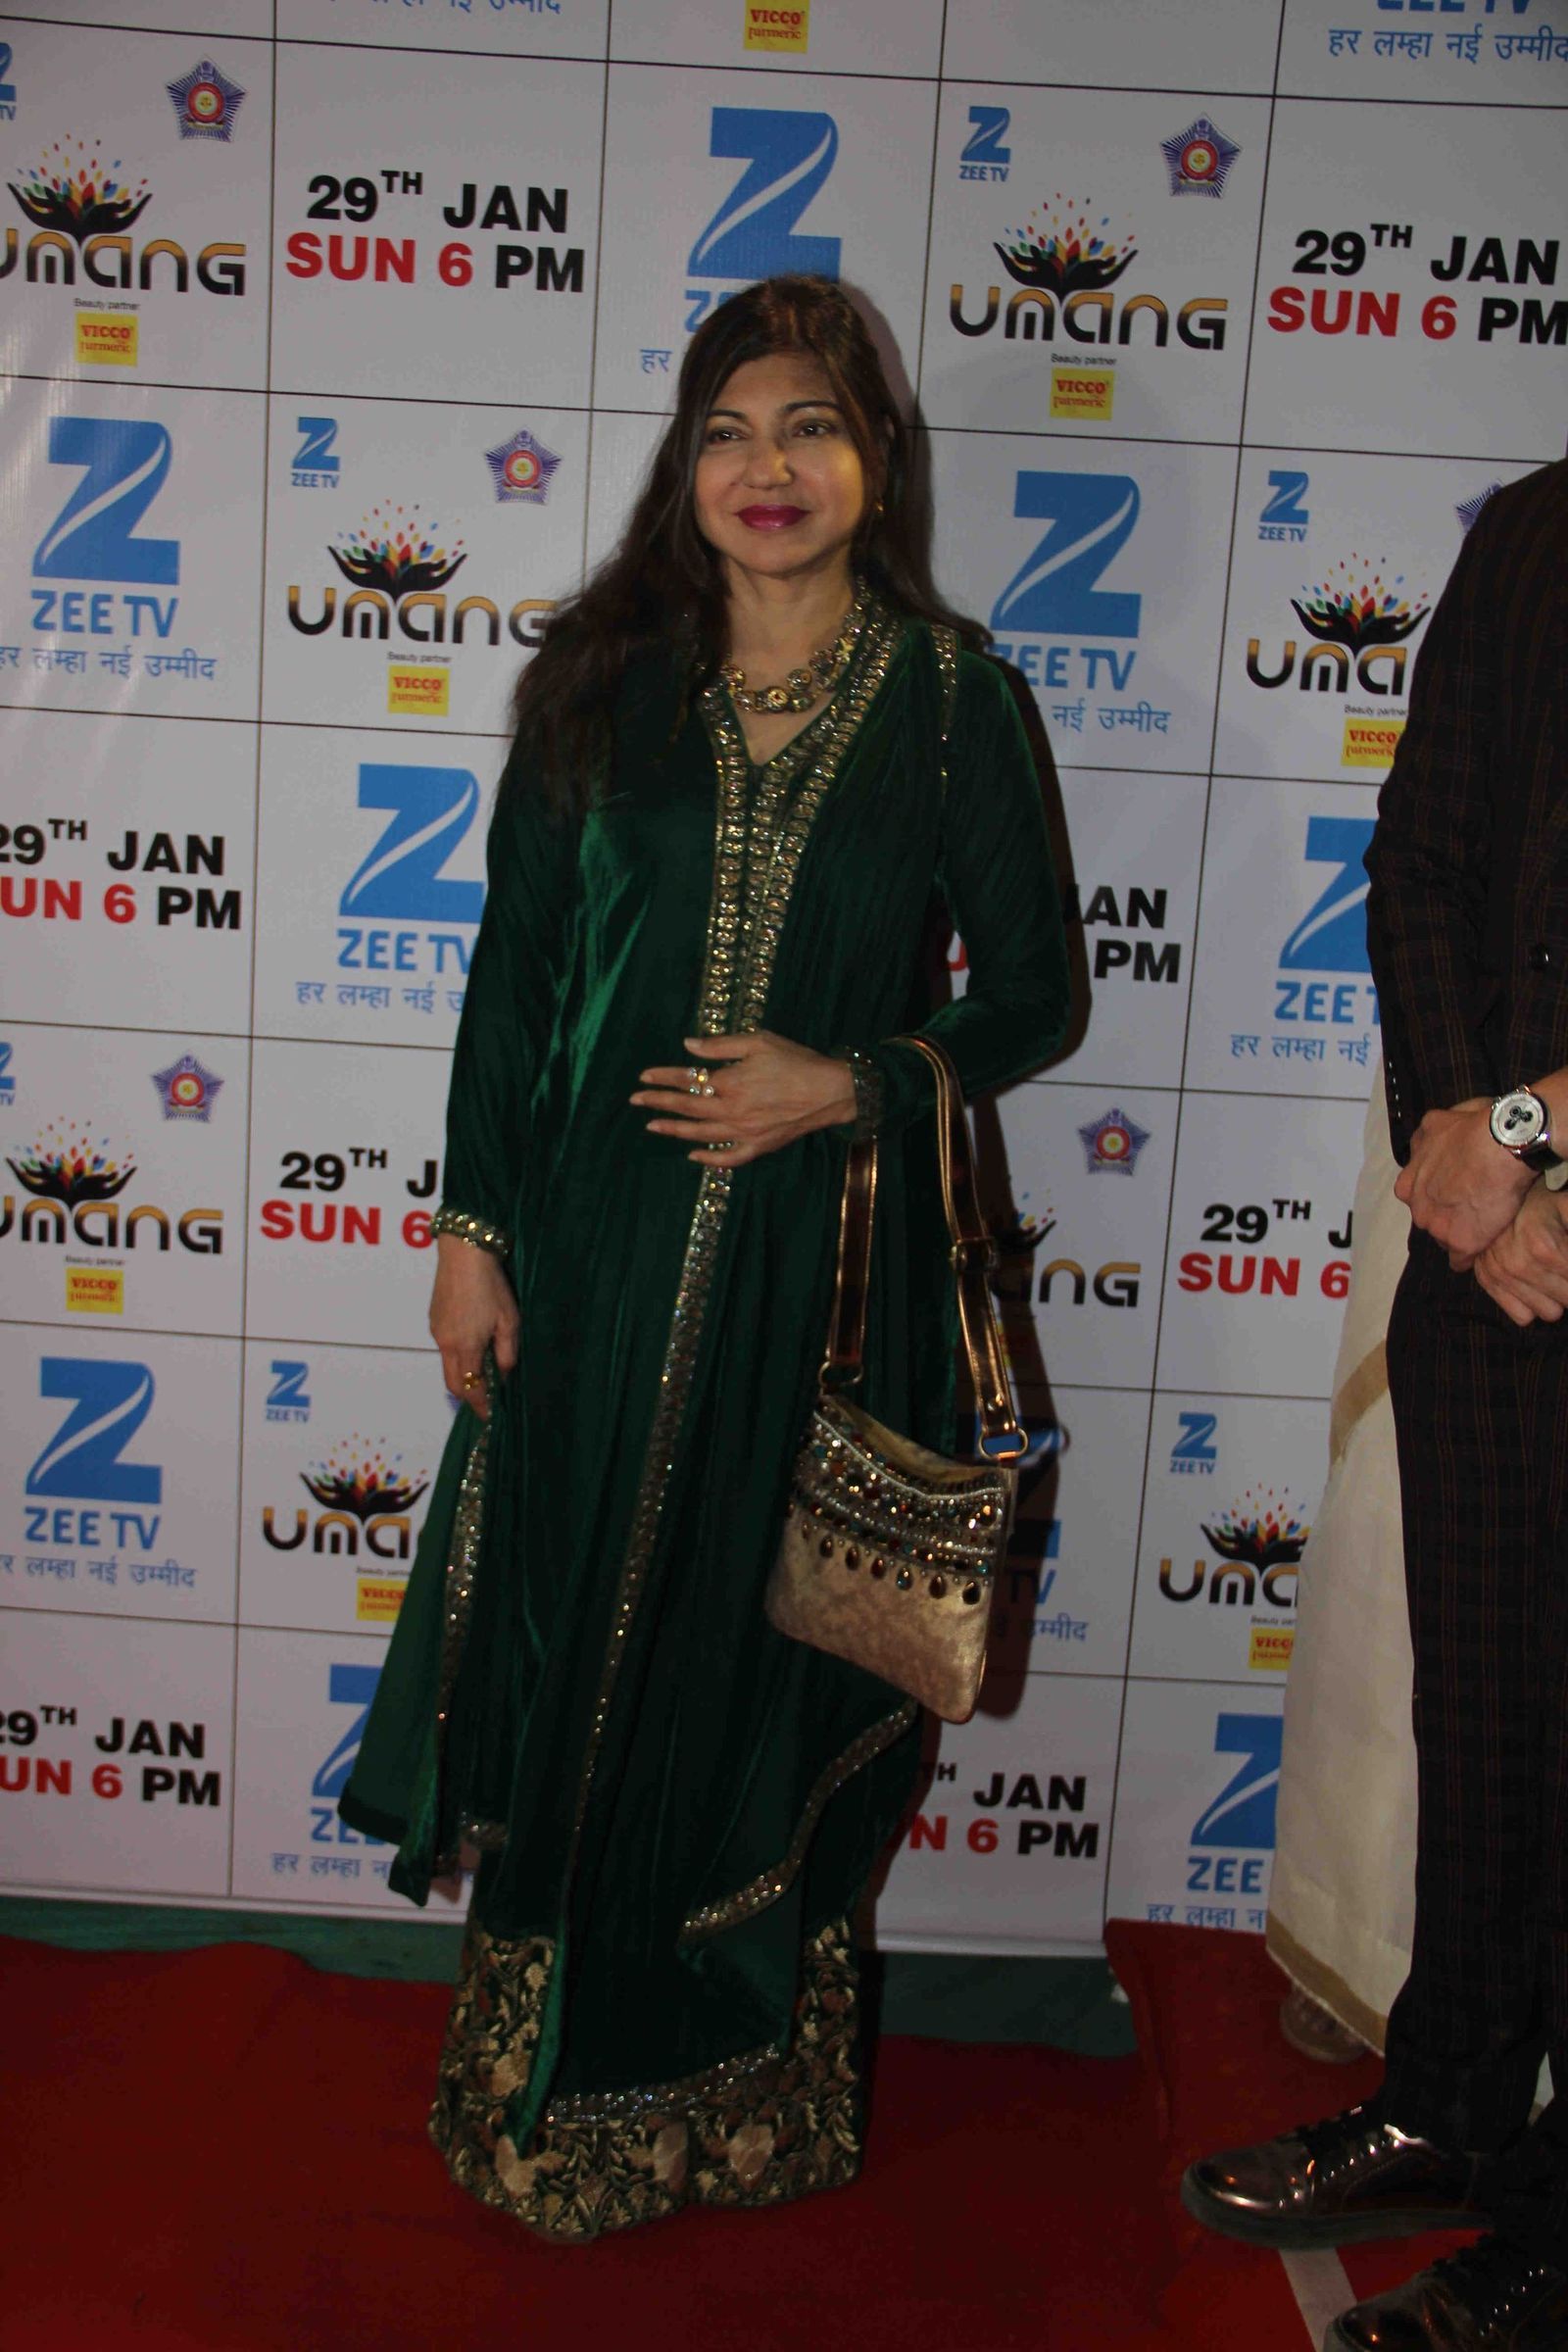 Alka Yagnik - Bollywood Celebs on red carpet at Umang 2017 Photos | Picture 1464541